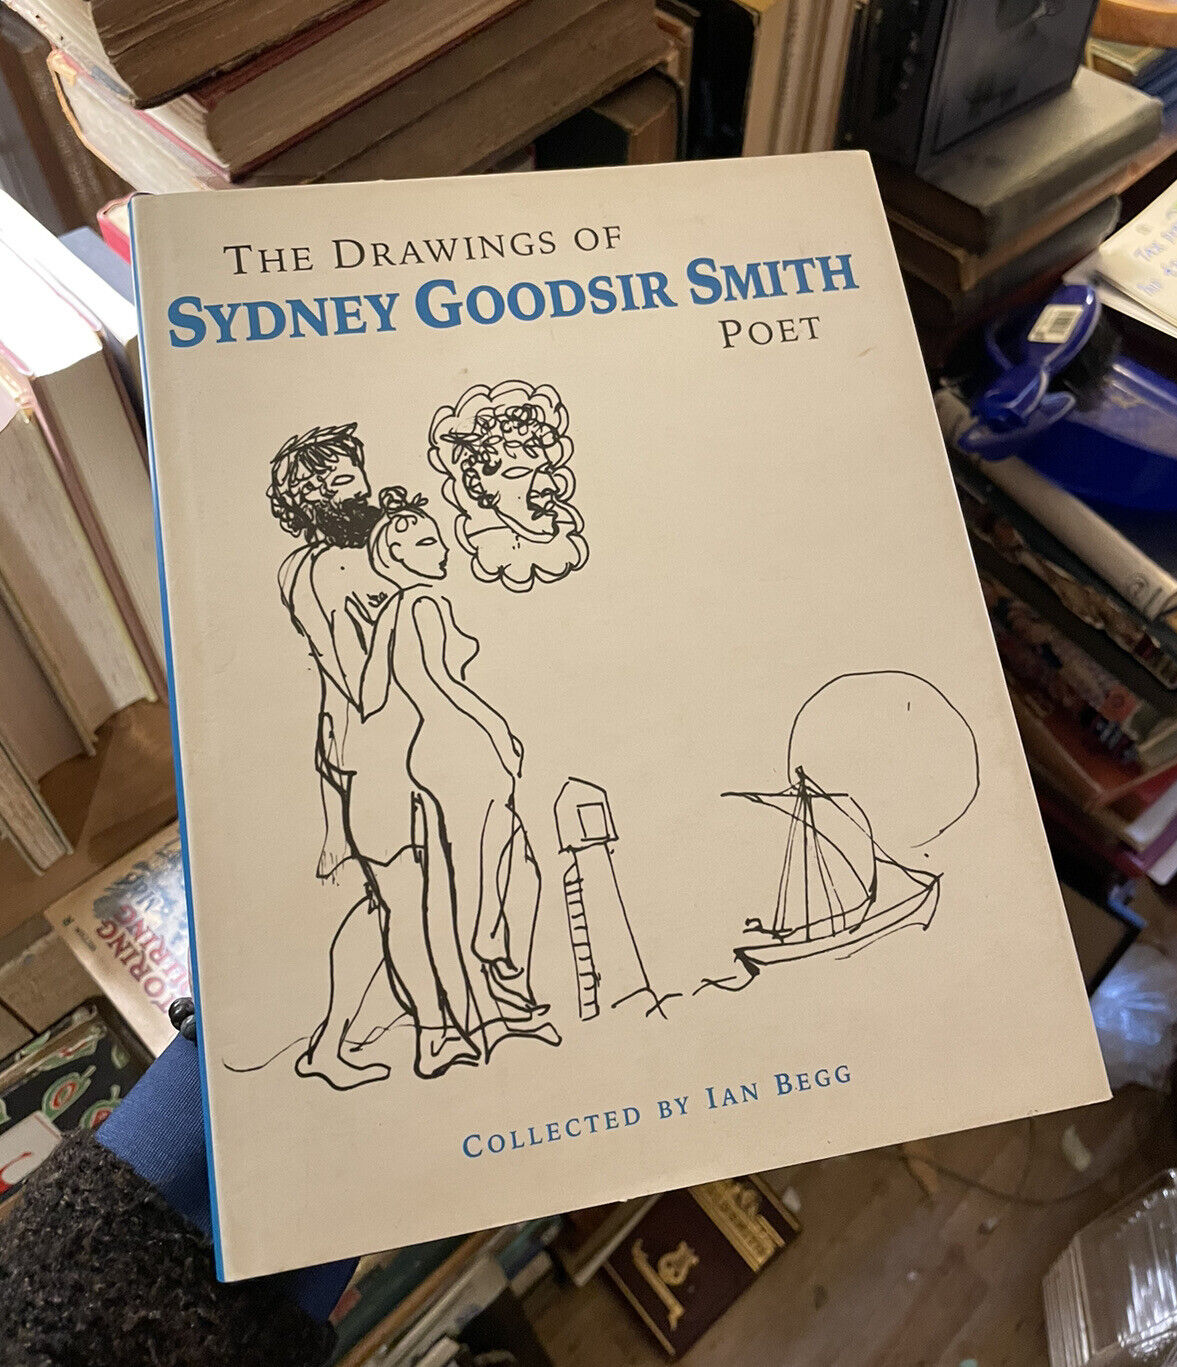 SIGNED COPY The Drawings of Sydney Goodsir Smith, Poet : By Ian Begg